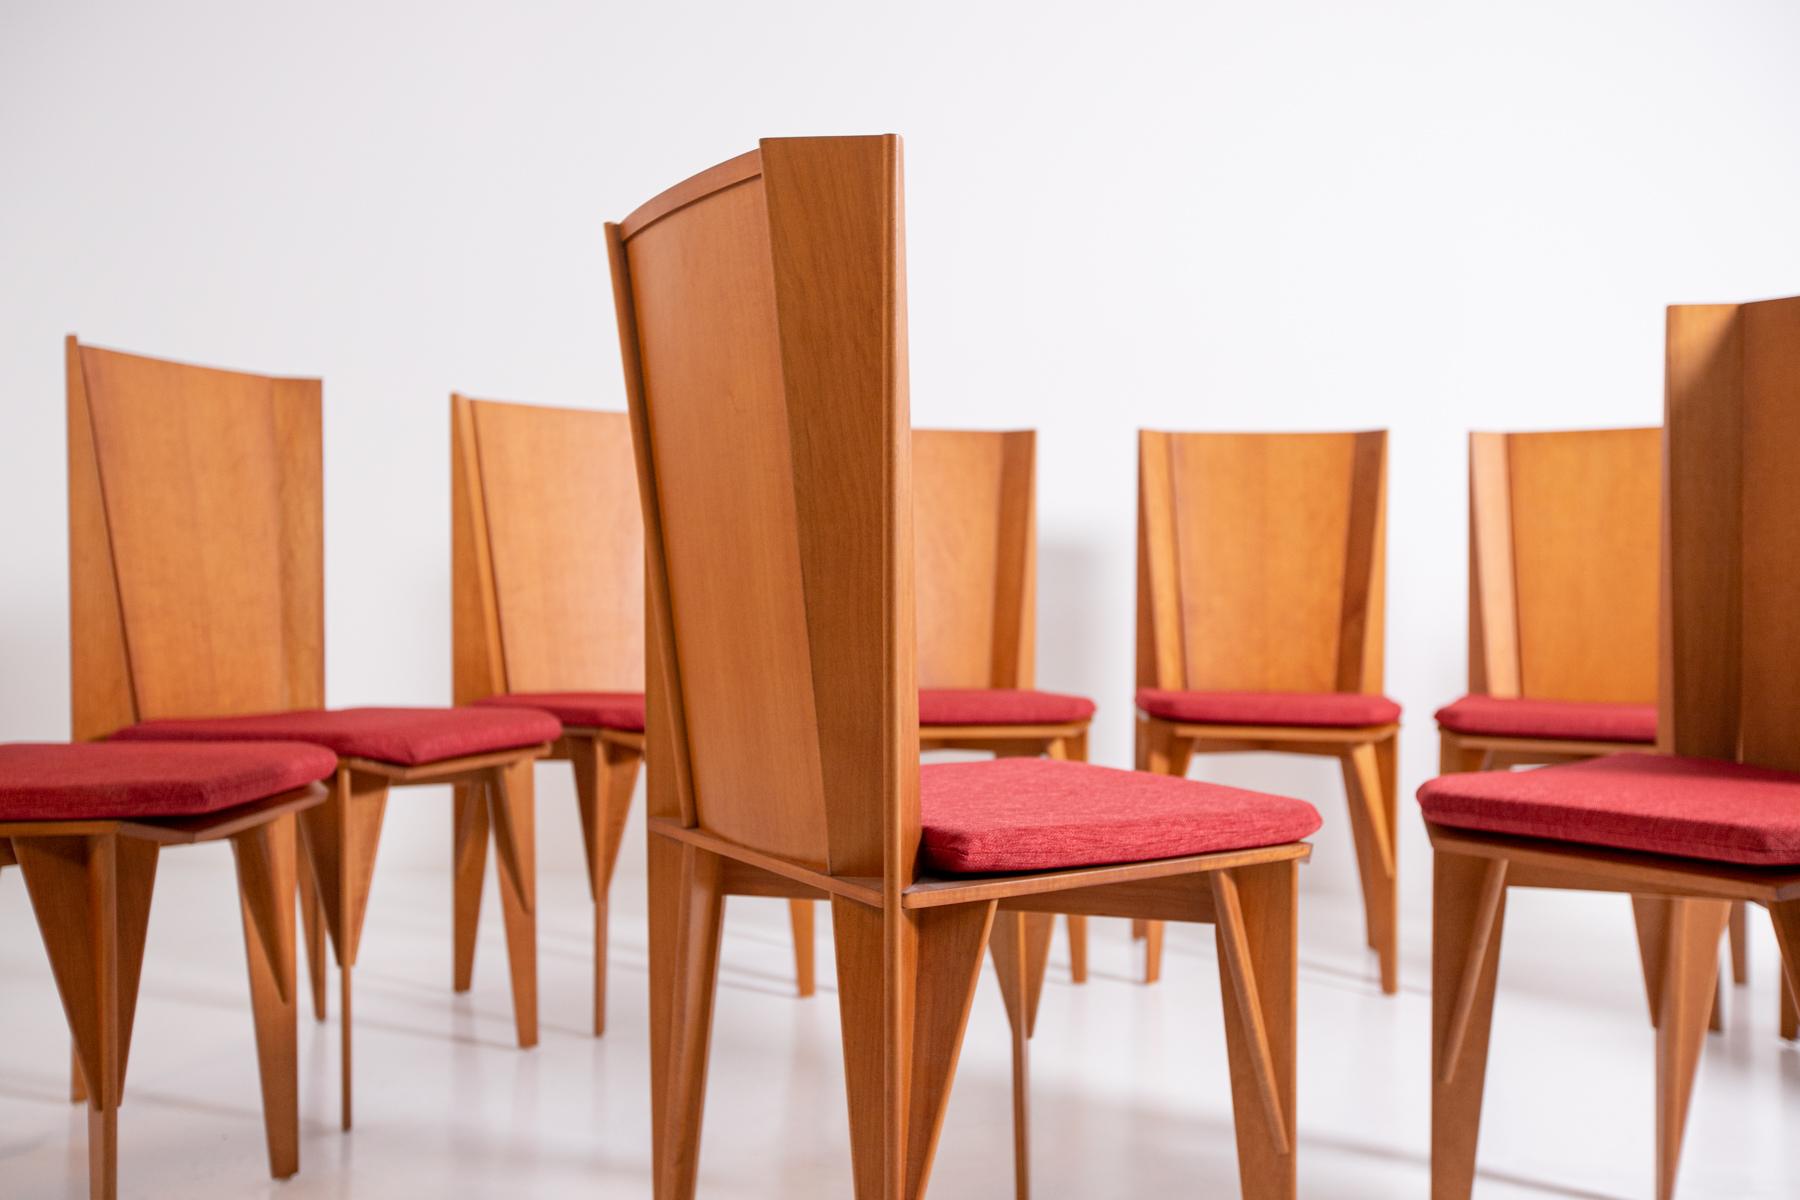 Set of 10 Giorgetti Matrix model chairs in wood with original seat of the time in red fabric in excellent condition. Architectural chair by Adriano and Paolo Suman for Giorgetti, Italy, circa 1984. This chair is from the Matrix series. It is